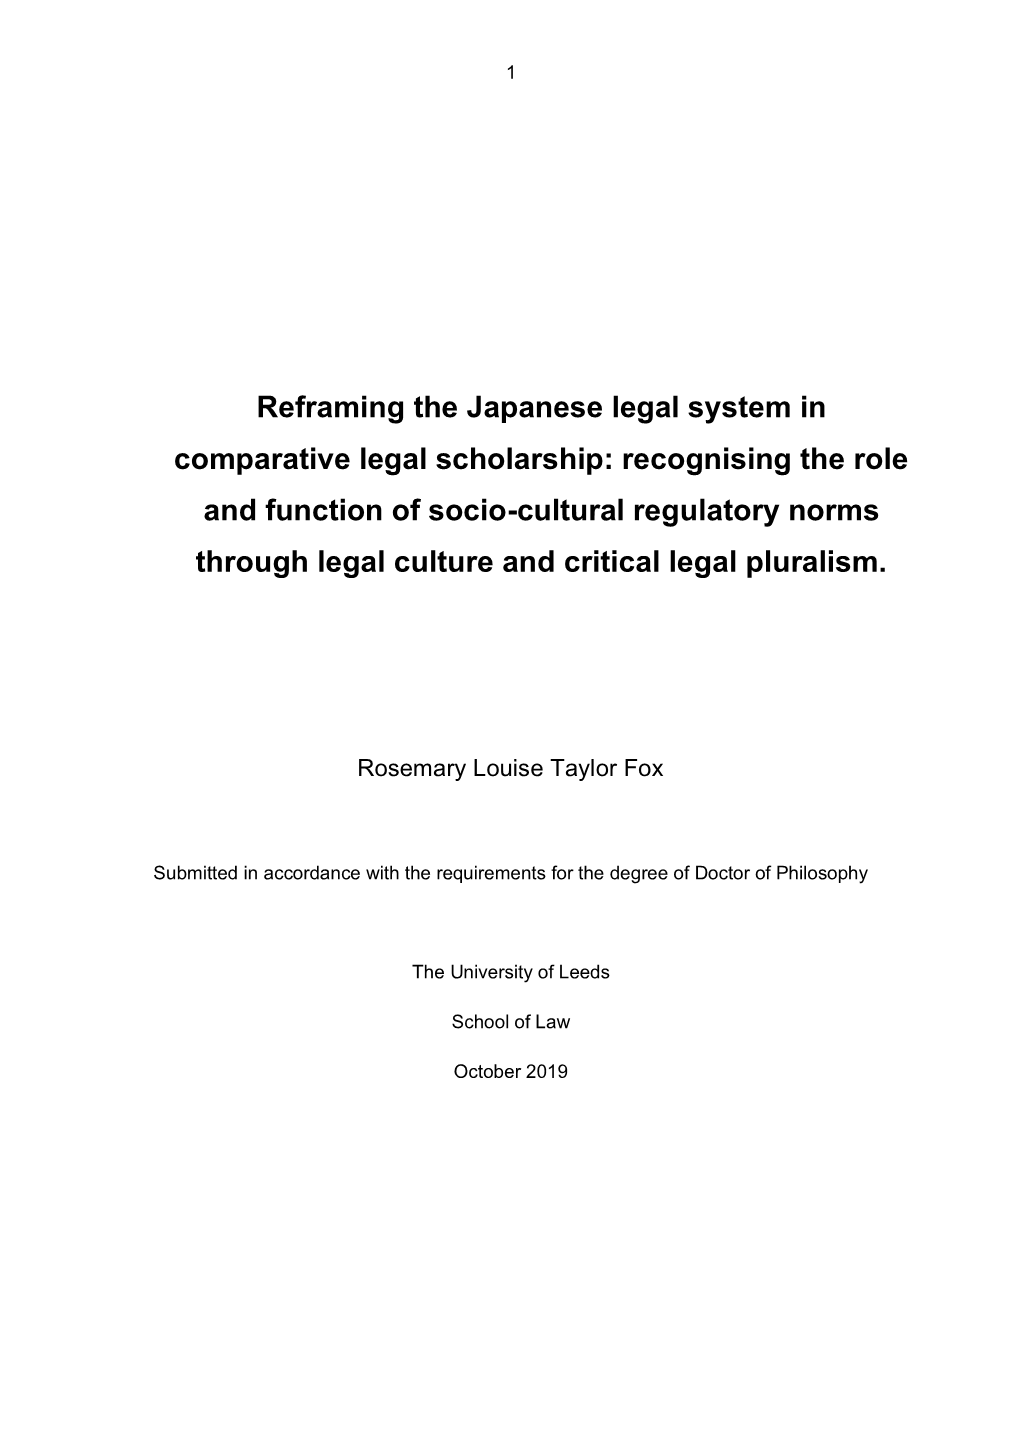 Reframing the Japanese Legal System in Comparative Legal Scholarship: Recognising the Role and Function of Socio-Cultural Regula